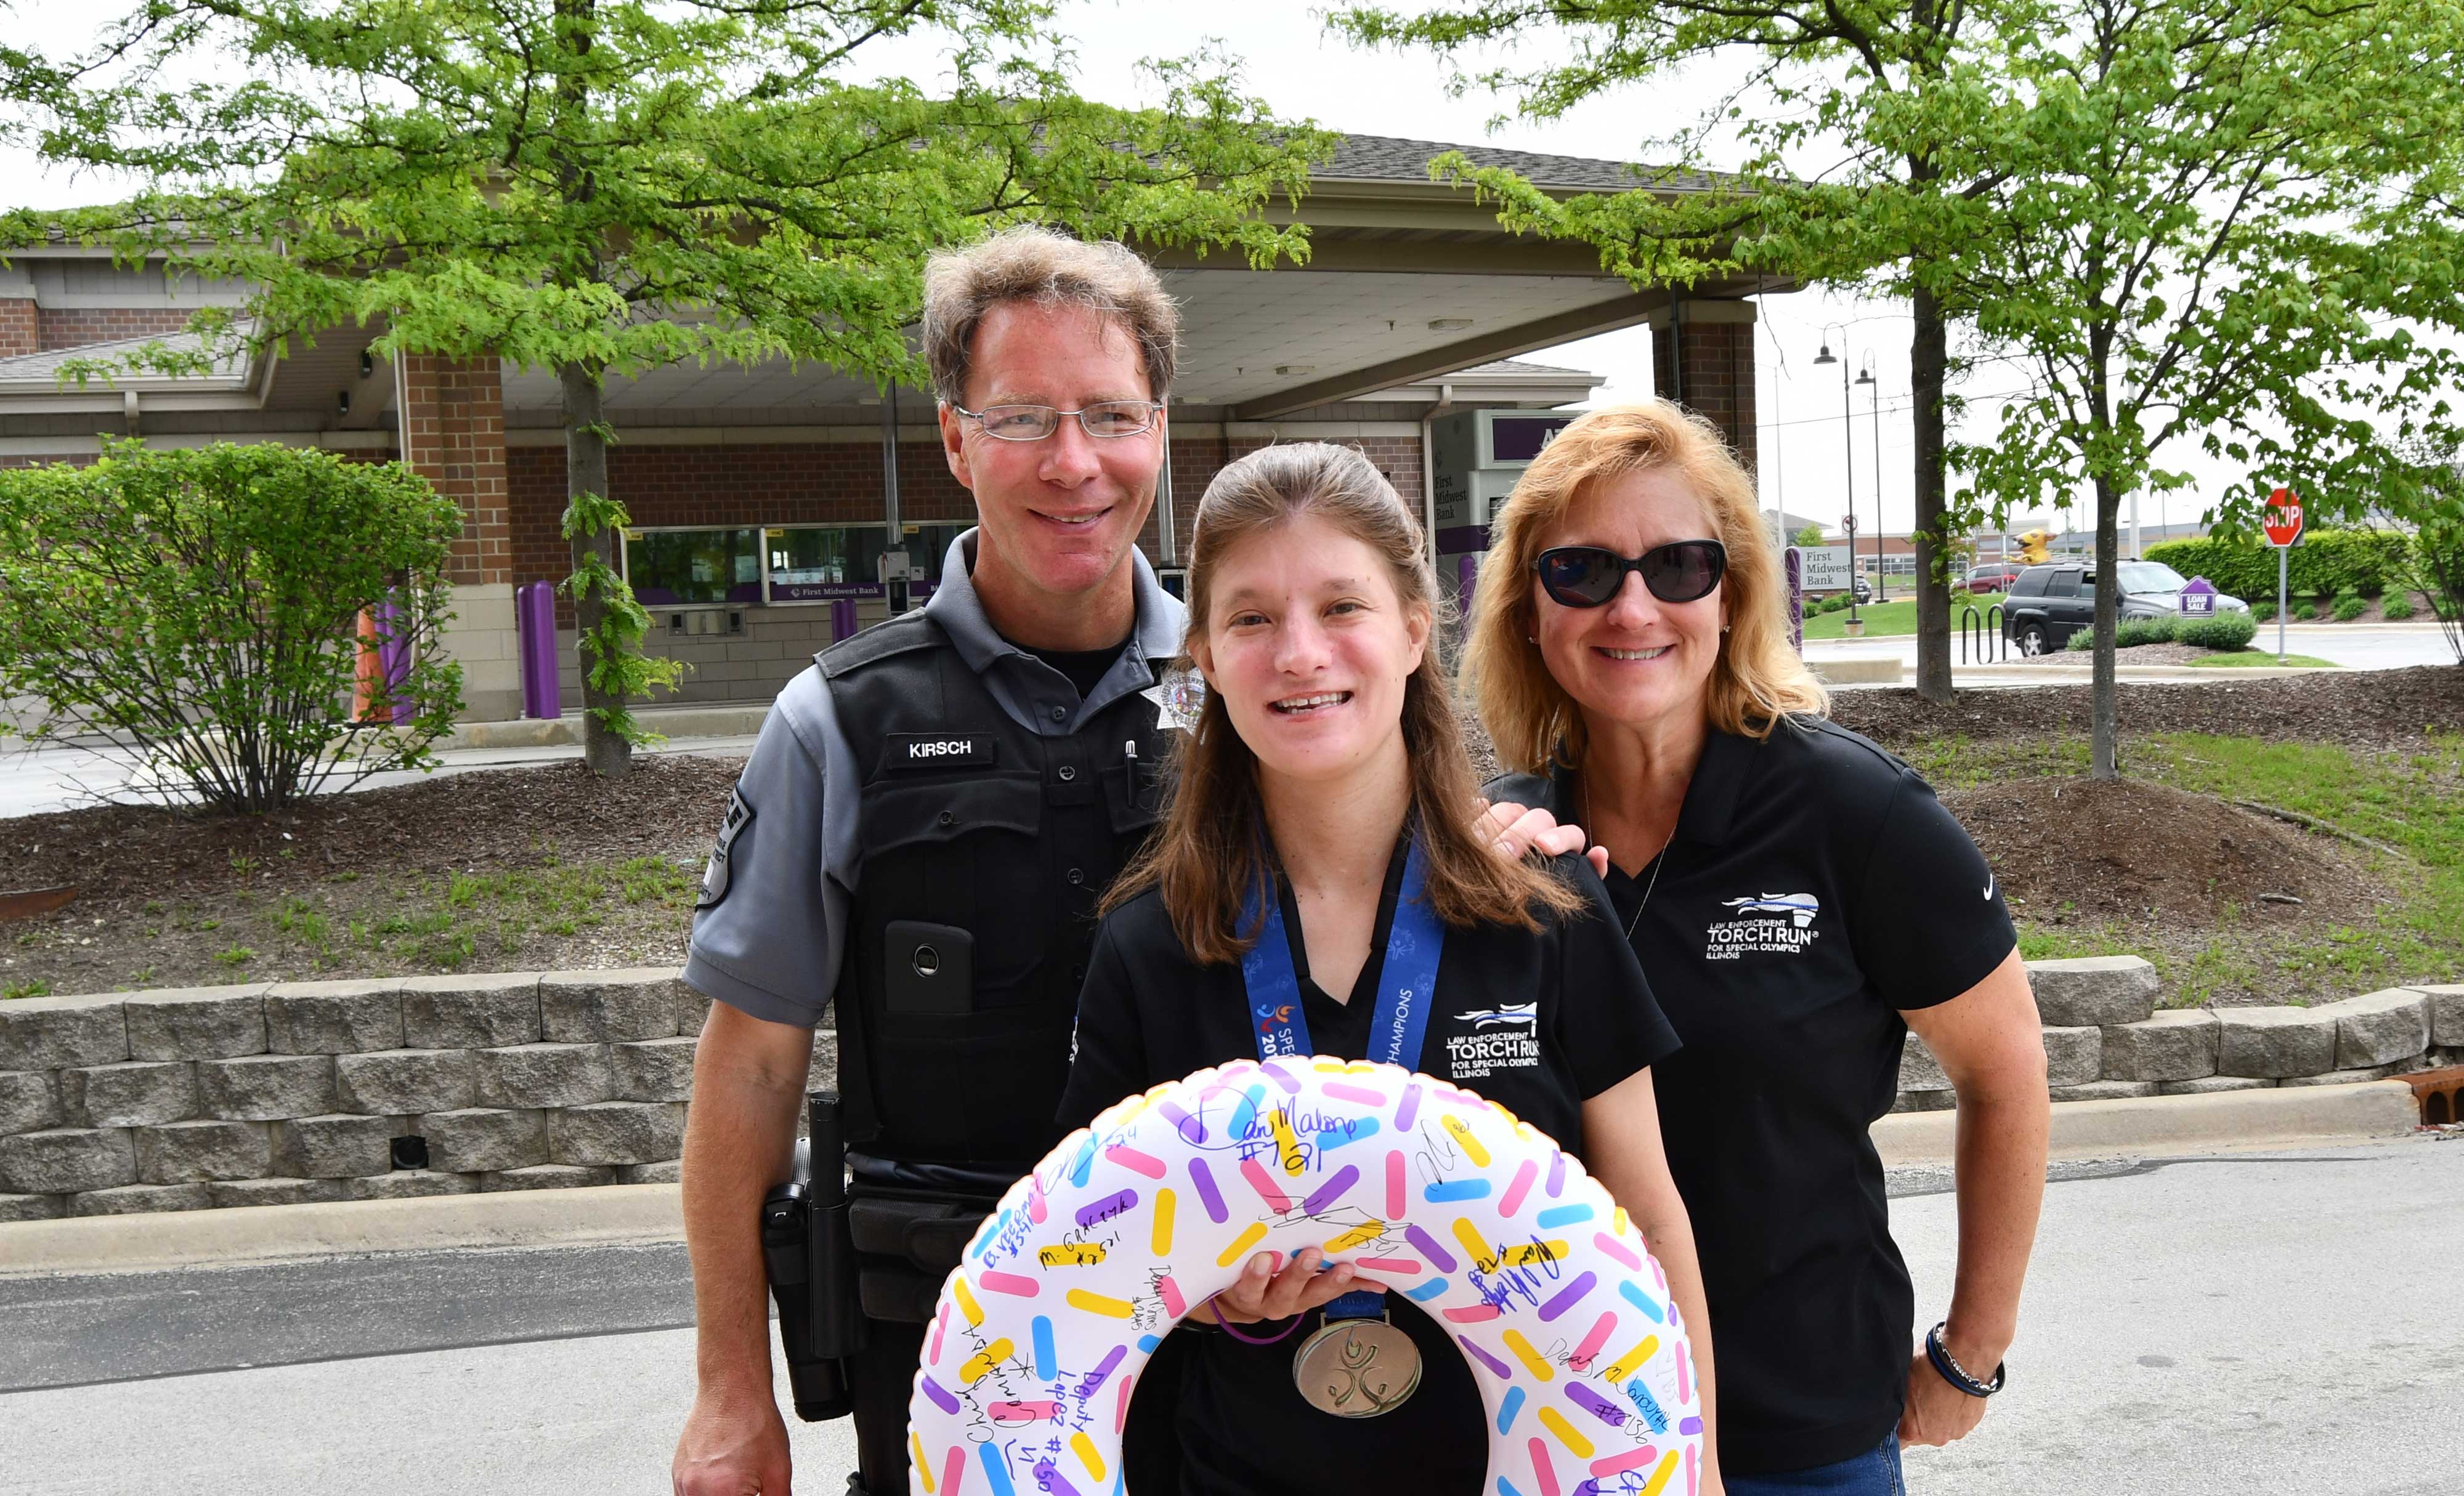 Officer Steven Kirsch during a Special Olympics fundraiser in 2019.